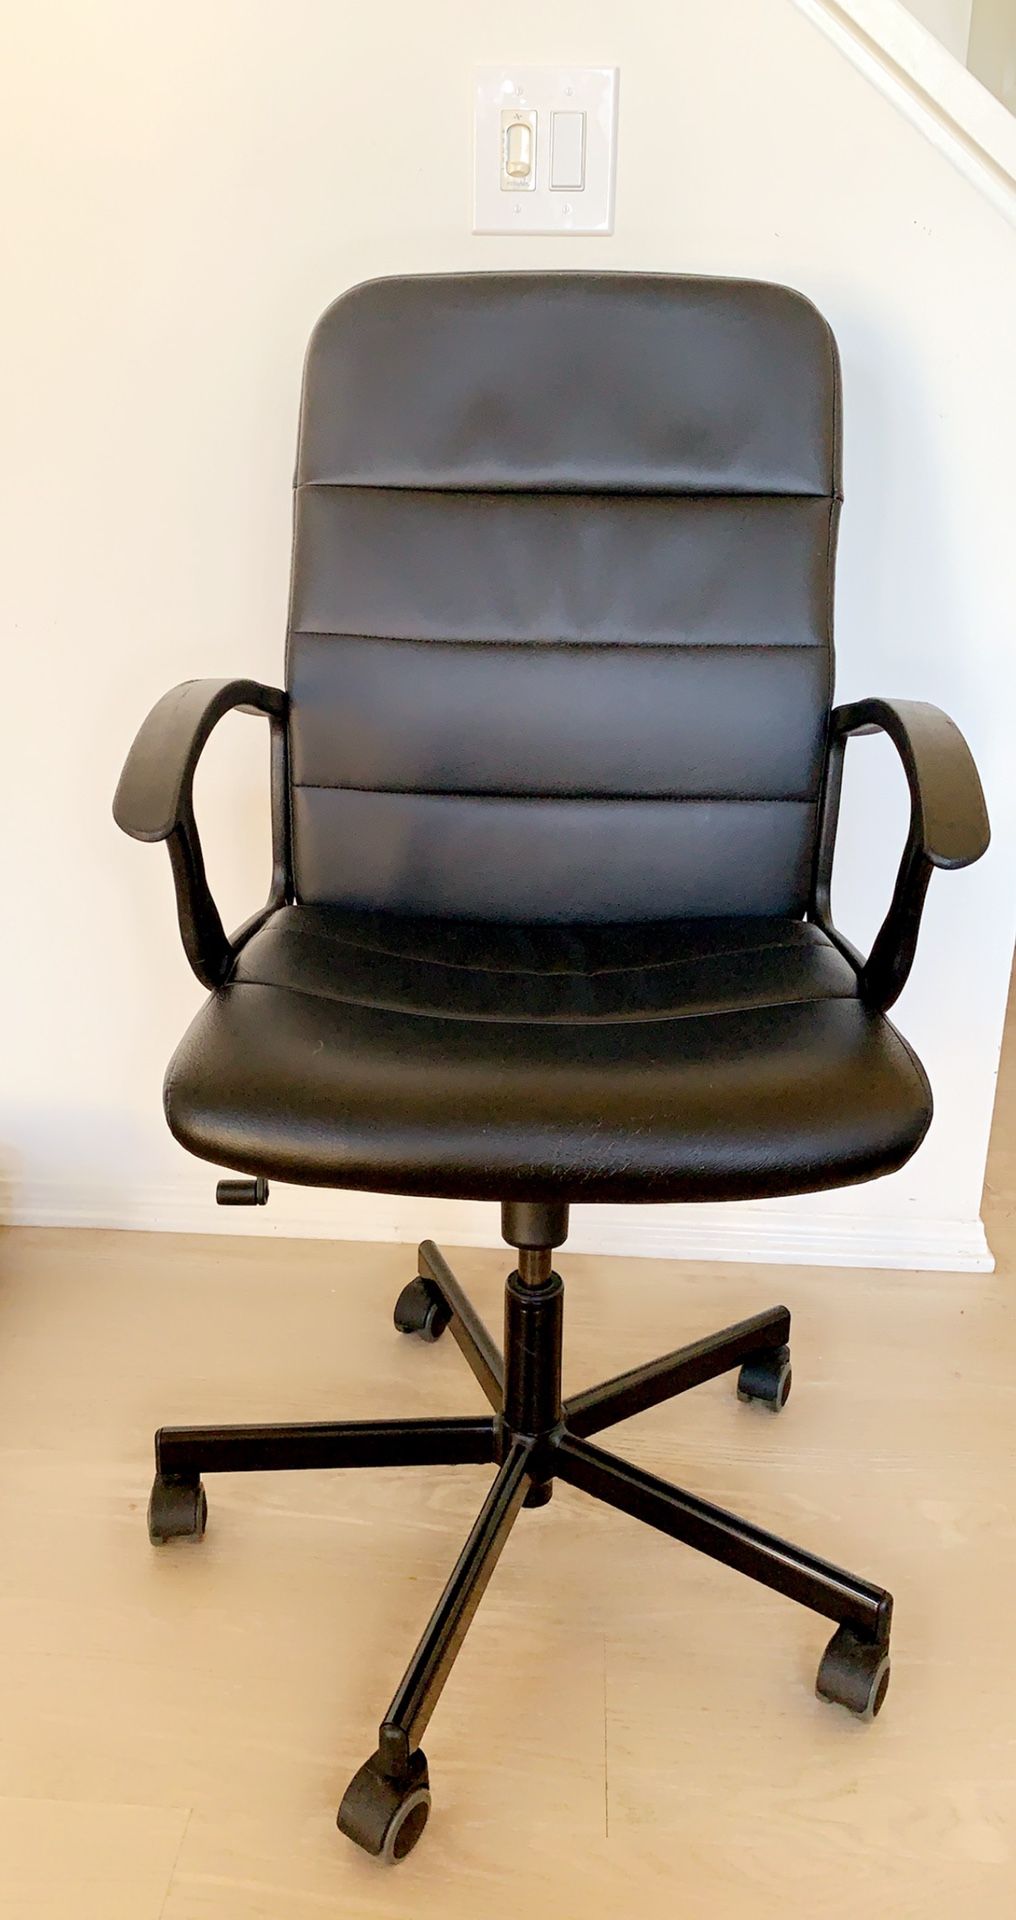 Black leather office chair, Super comfy ! Just there is some scratch from the back you can see it from the second photo.